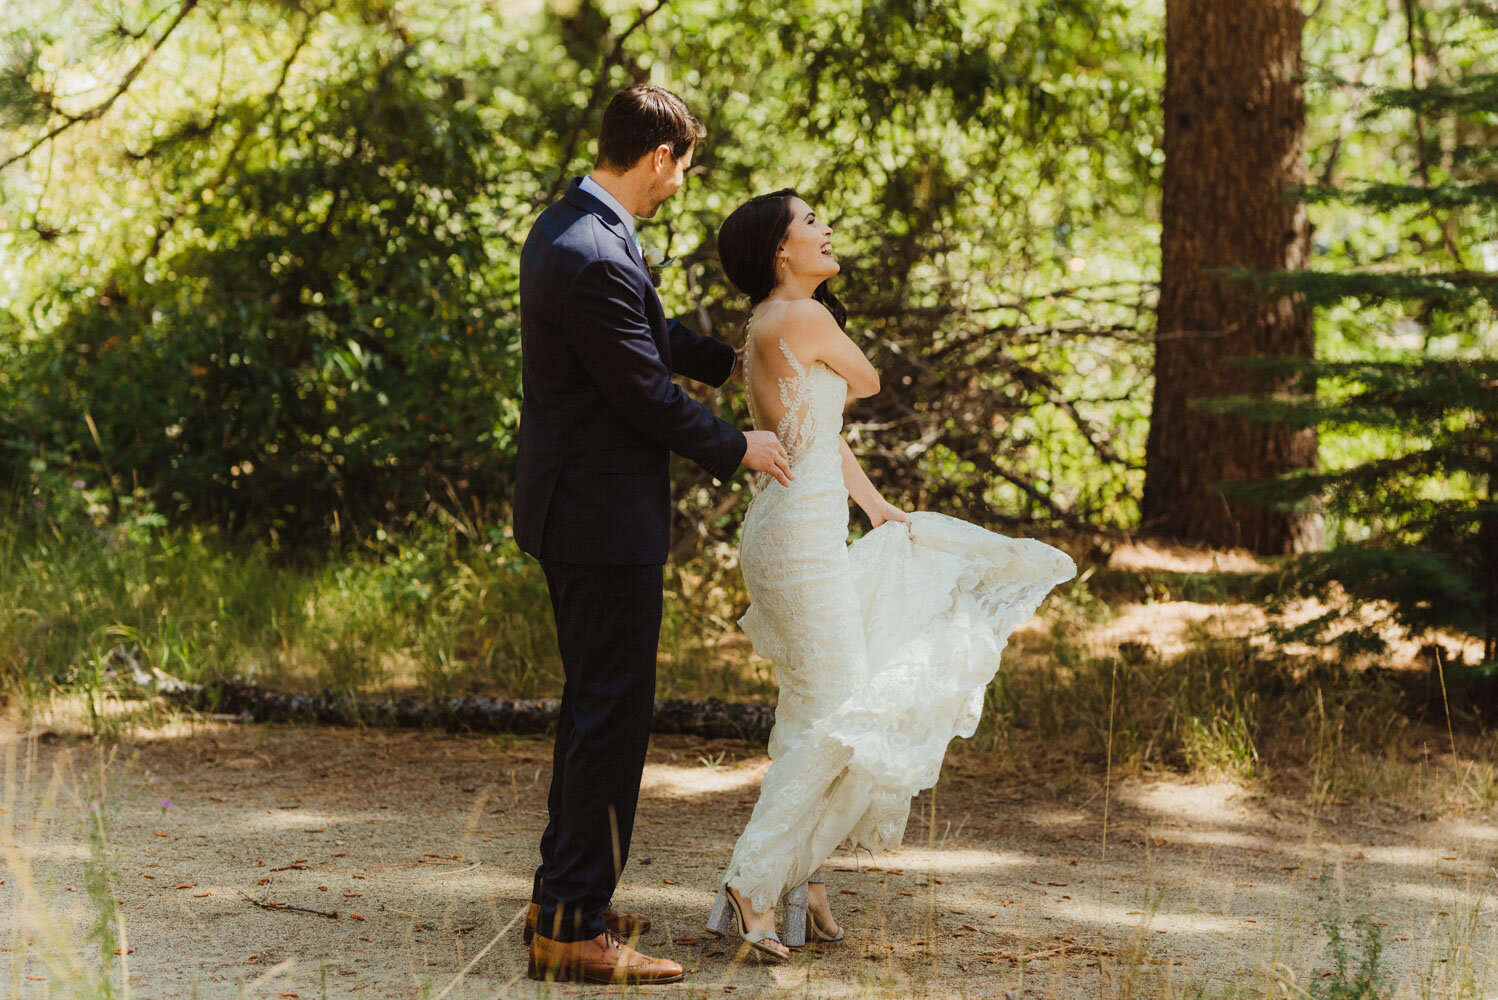 The Chateau Incline Village Wedding, first look photo